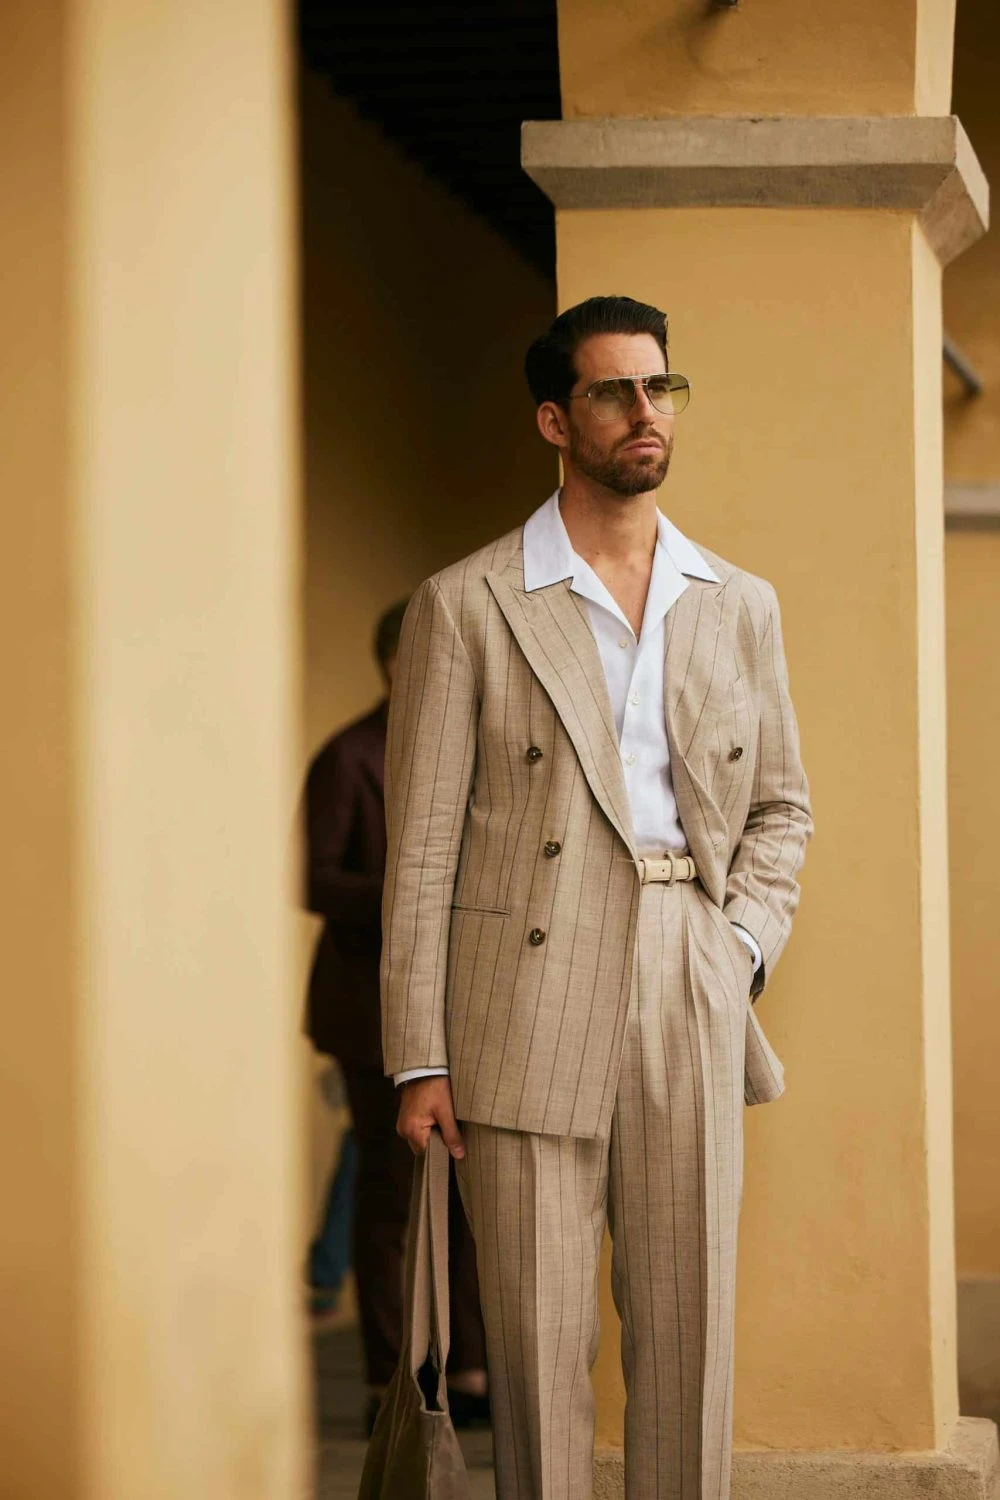 carlos domord at pitti uomo wearing taupe beige striped custom made suit by mond of copenhagen